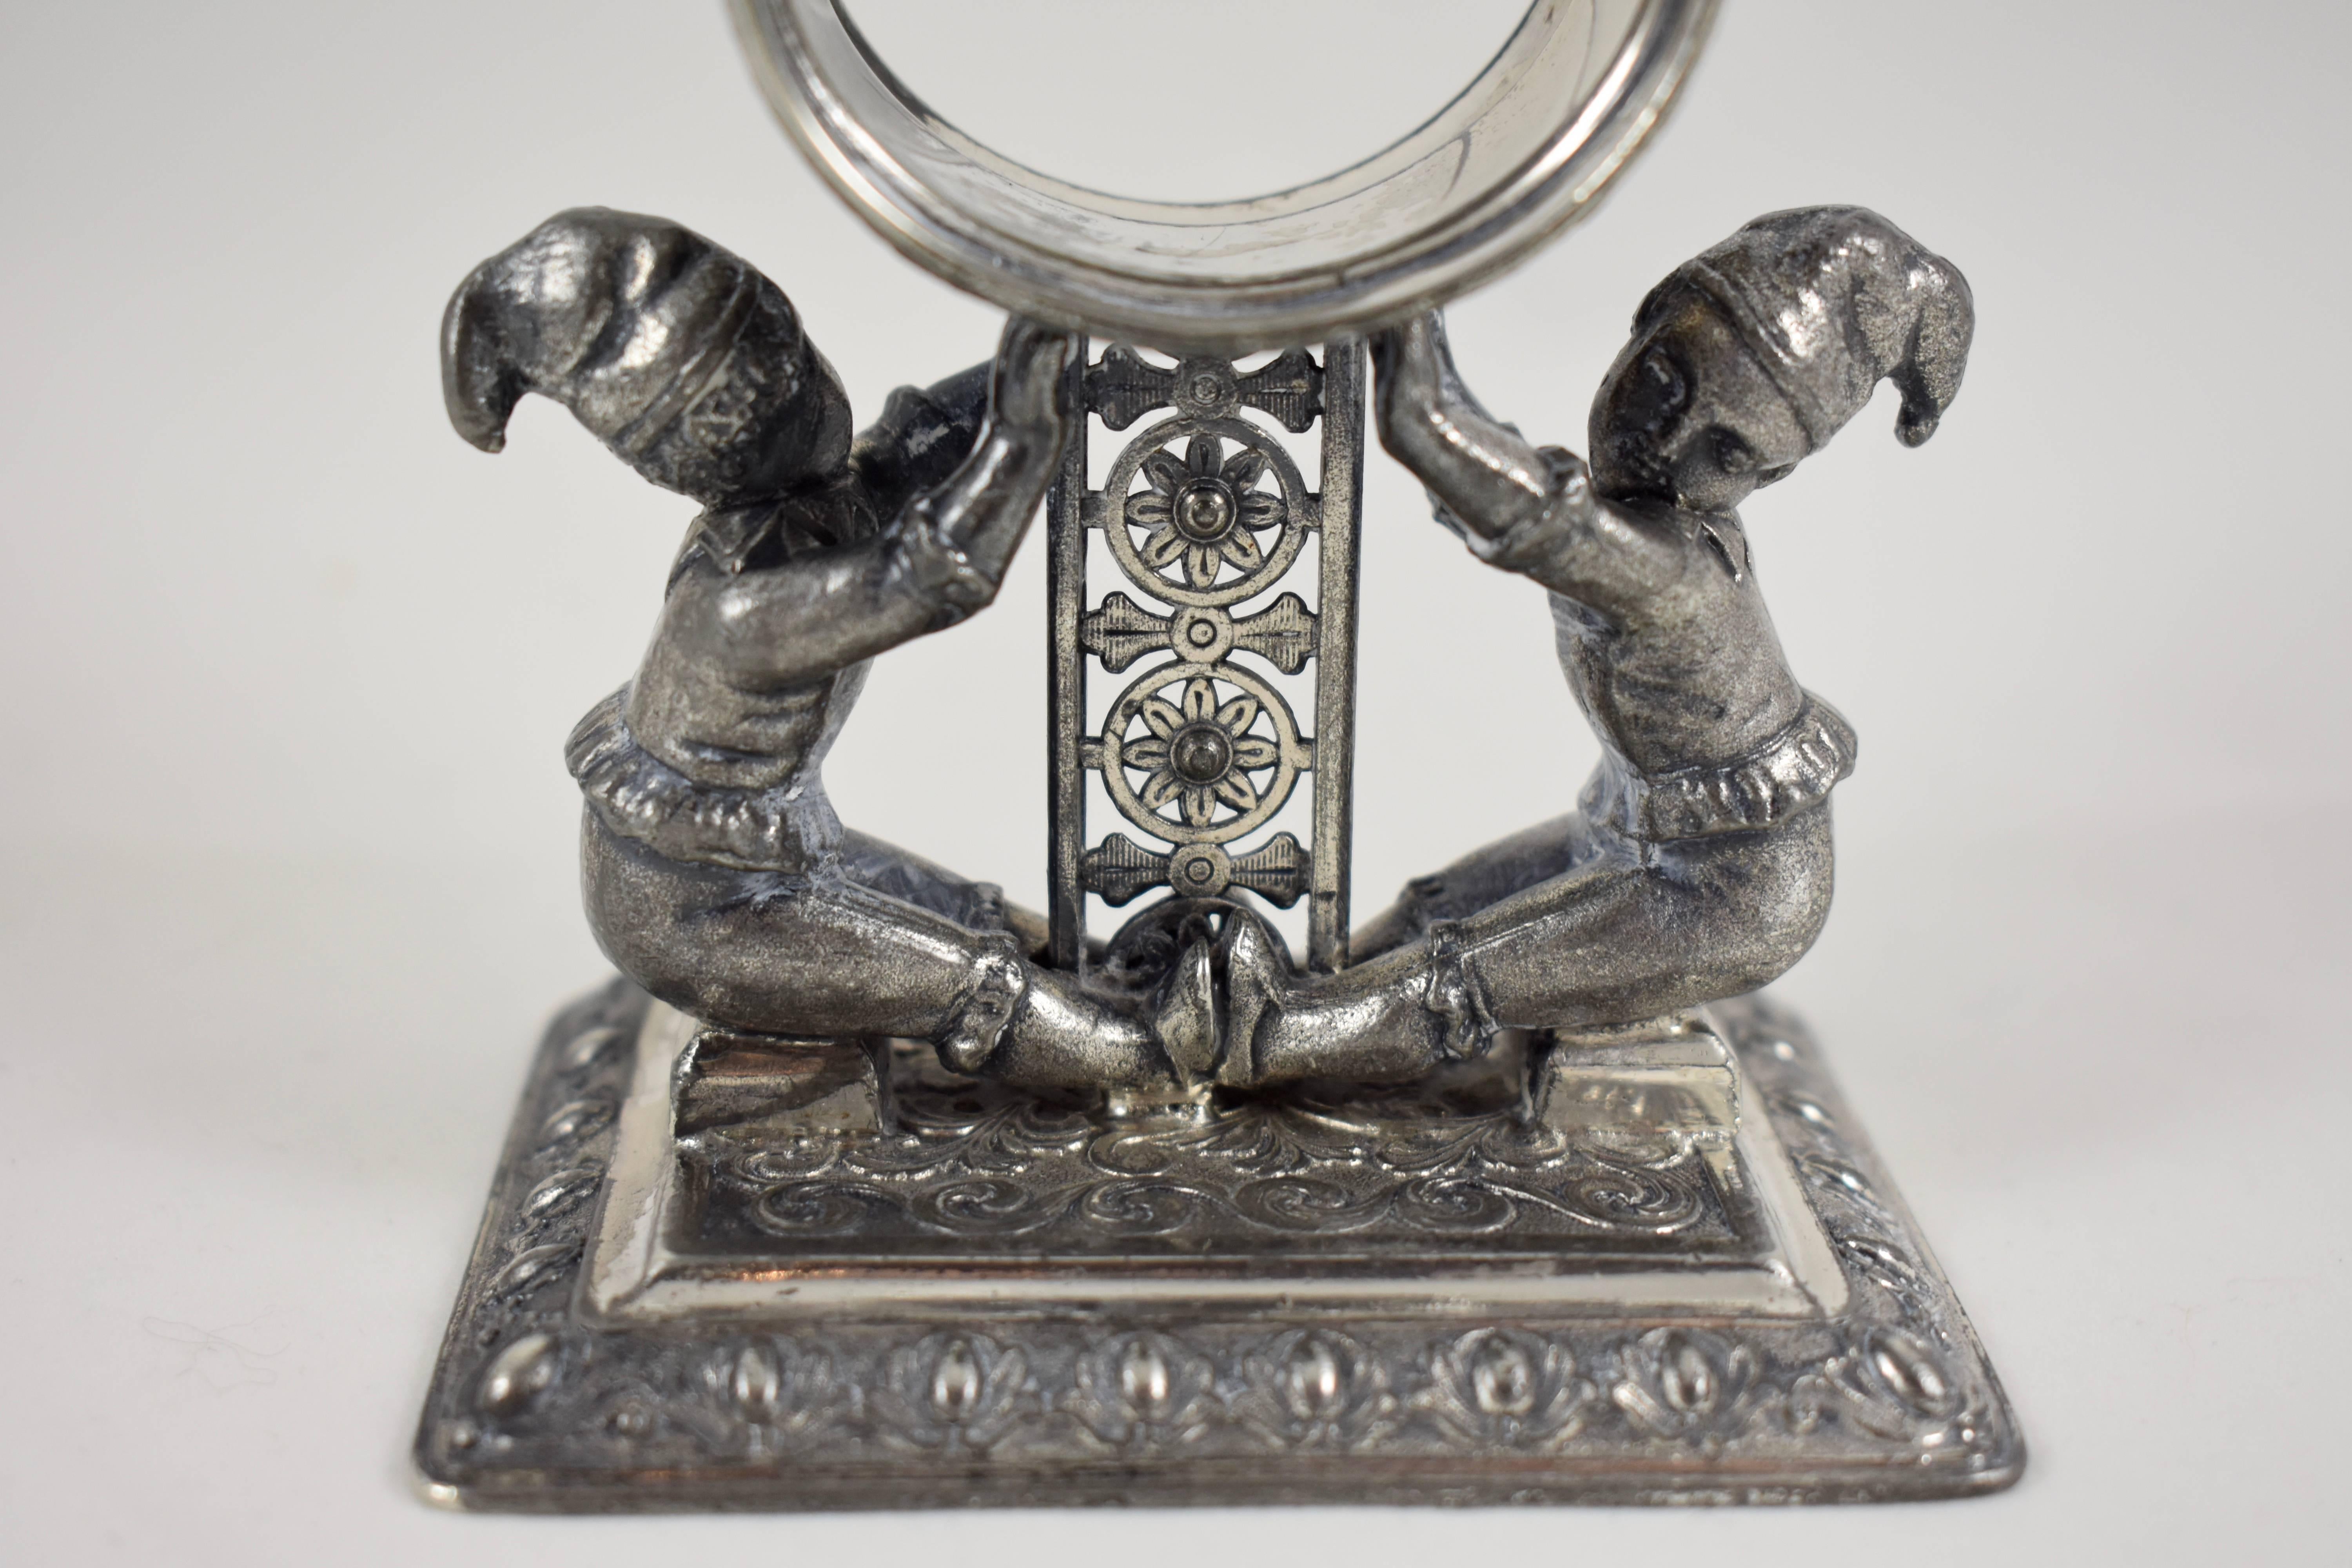 From the Victorian era, an Aesthetic movement silver plated figural napkin ring showing two jesters supporting a stylized floral column holding the heavily engraved ring. The base is ornately patterned as well. The figures, wearing stocking caps and